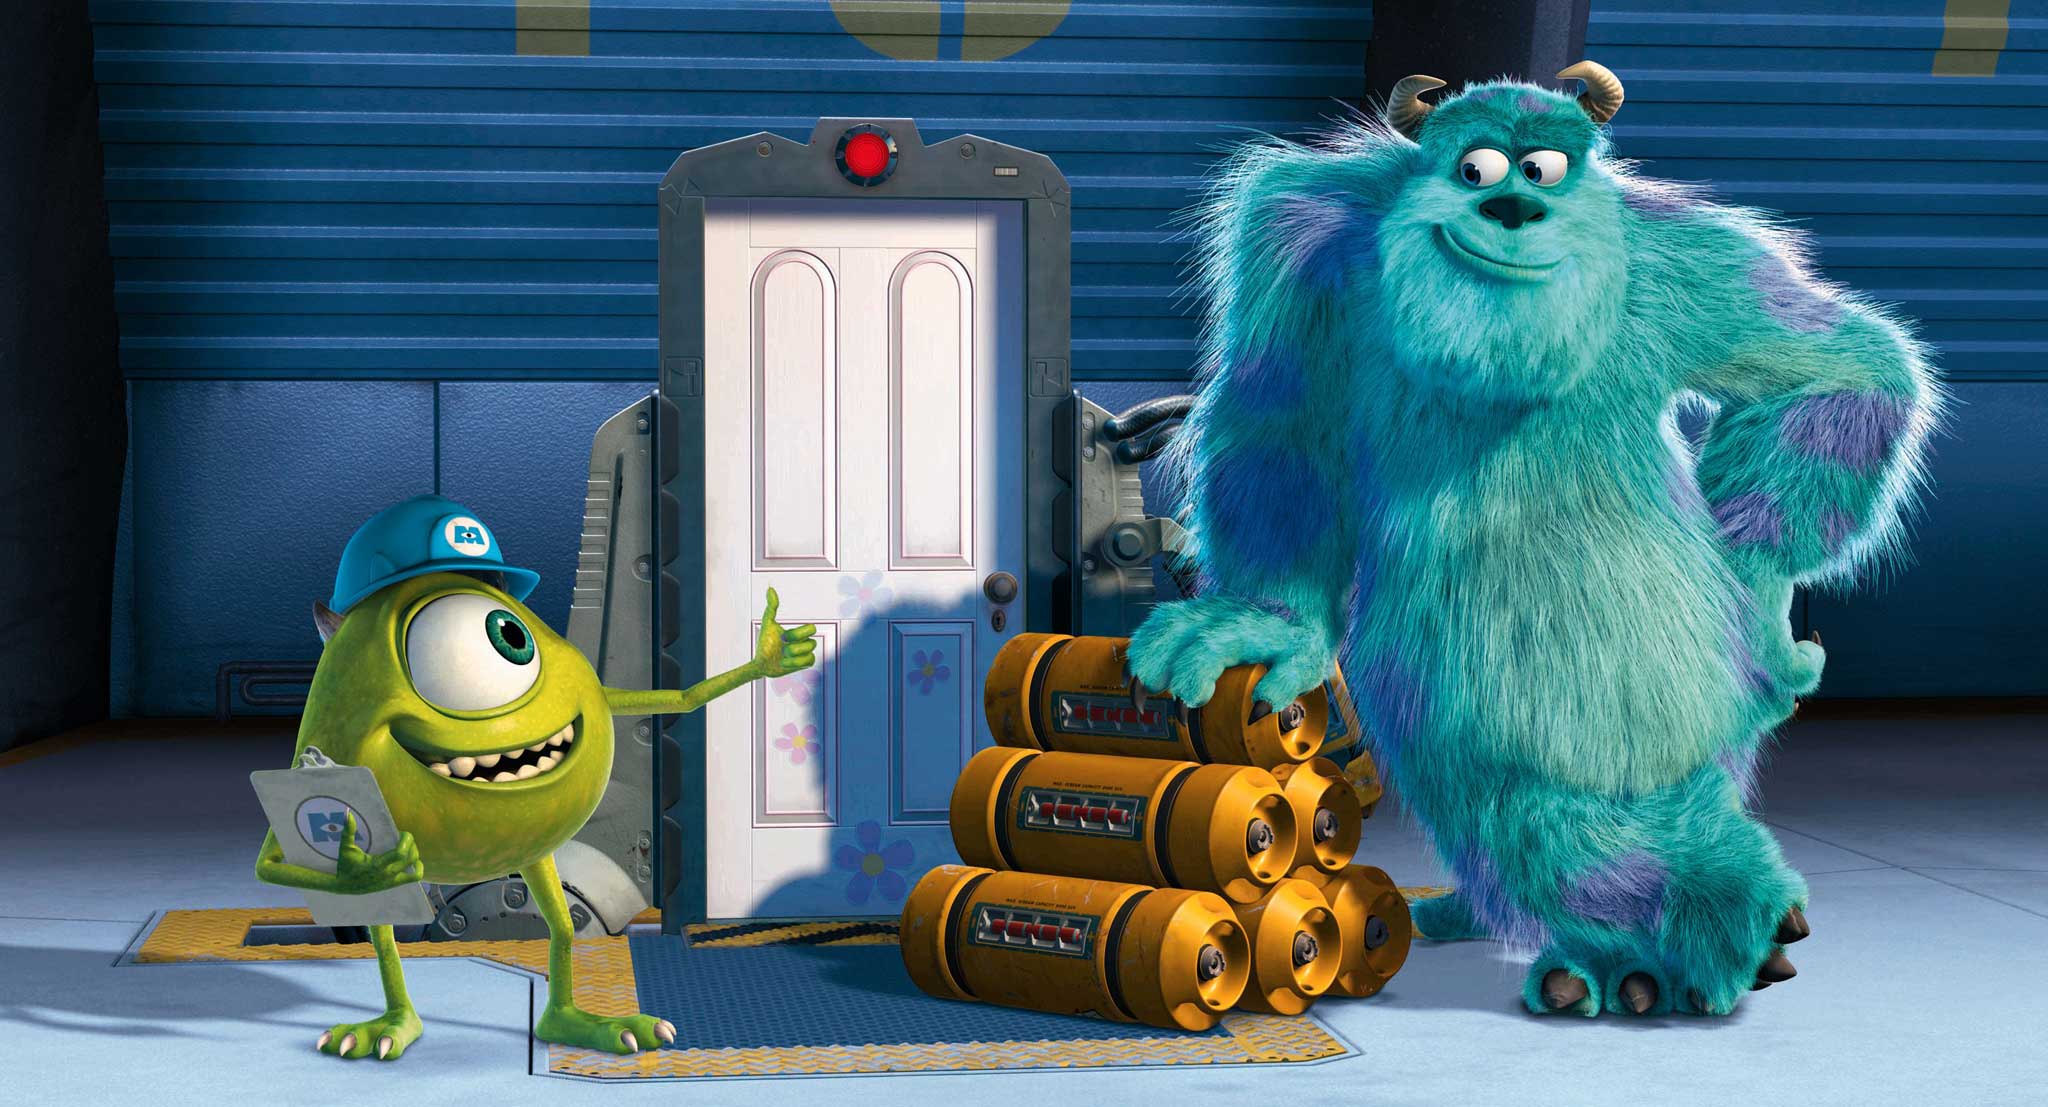 Disney's films, such as Monsters, Inc. (pictured) will rightly hold for decades